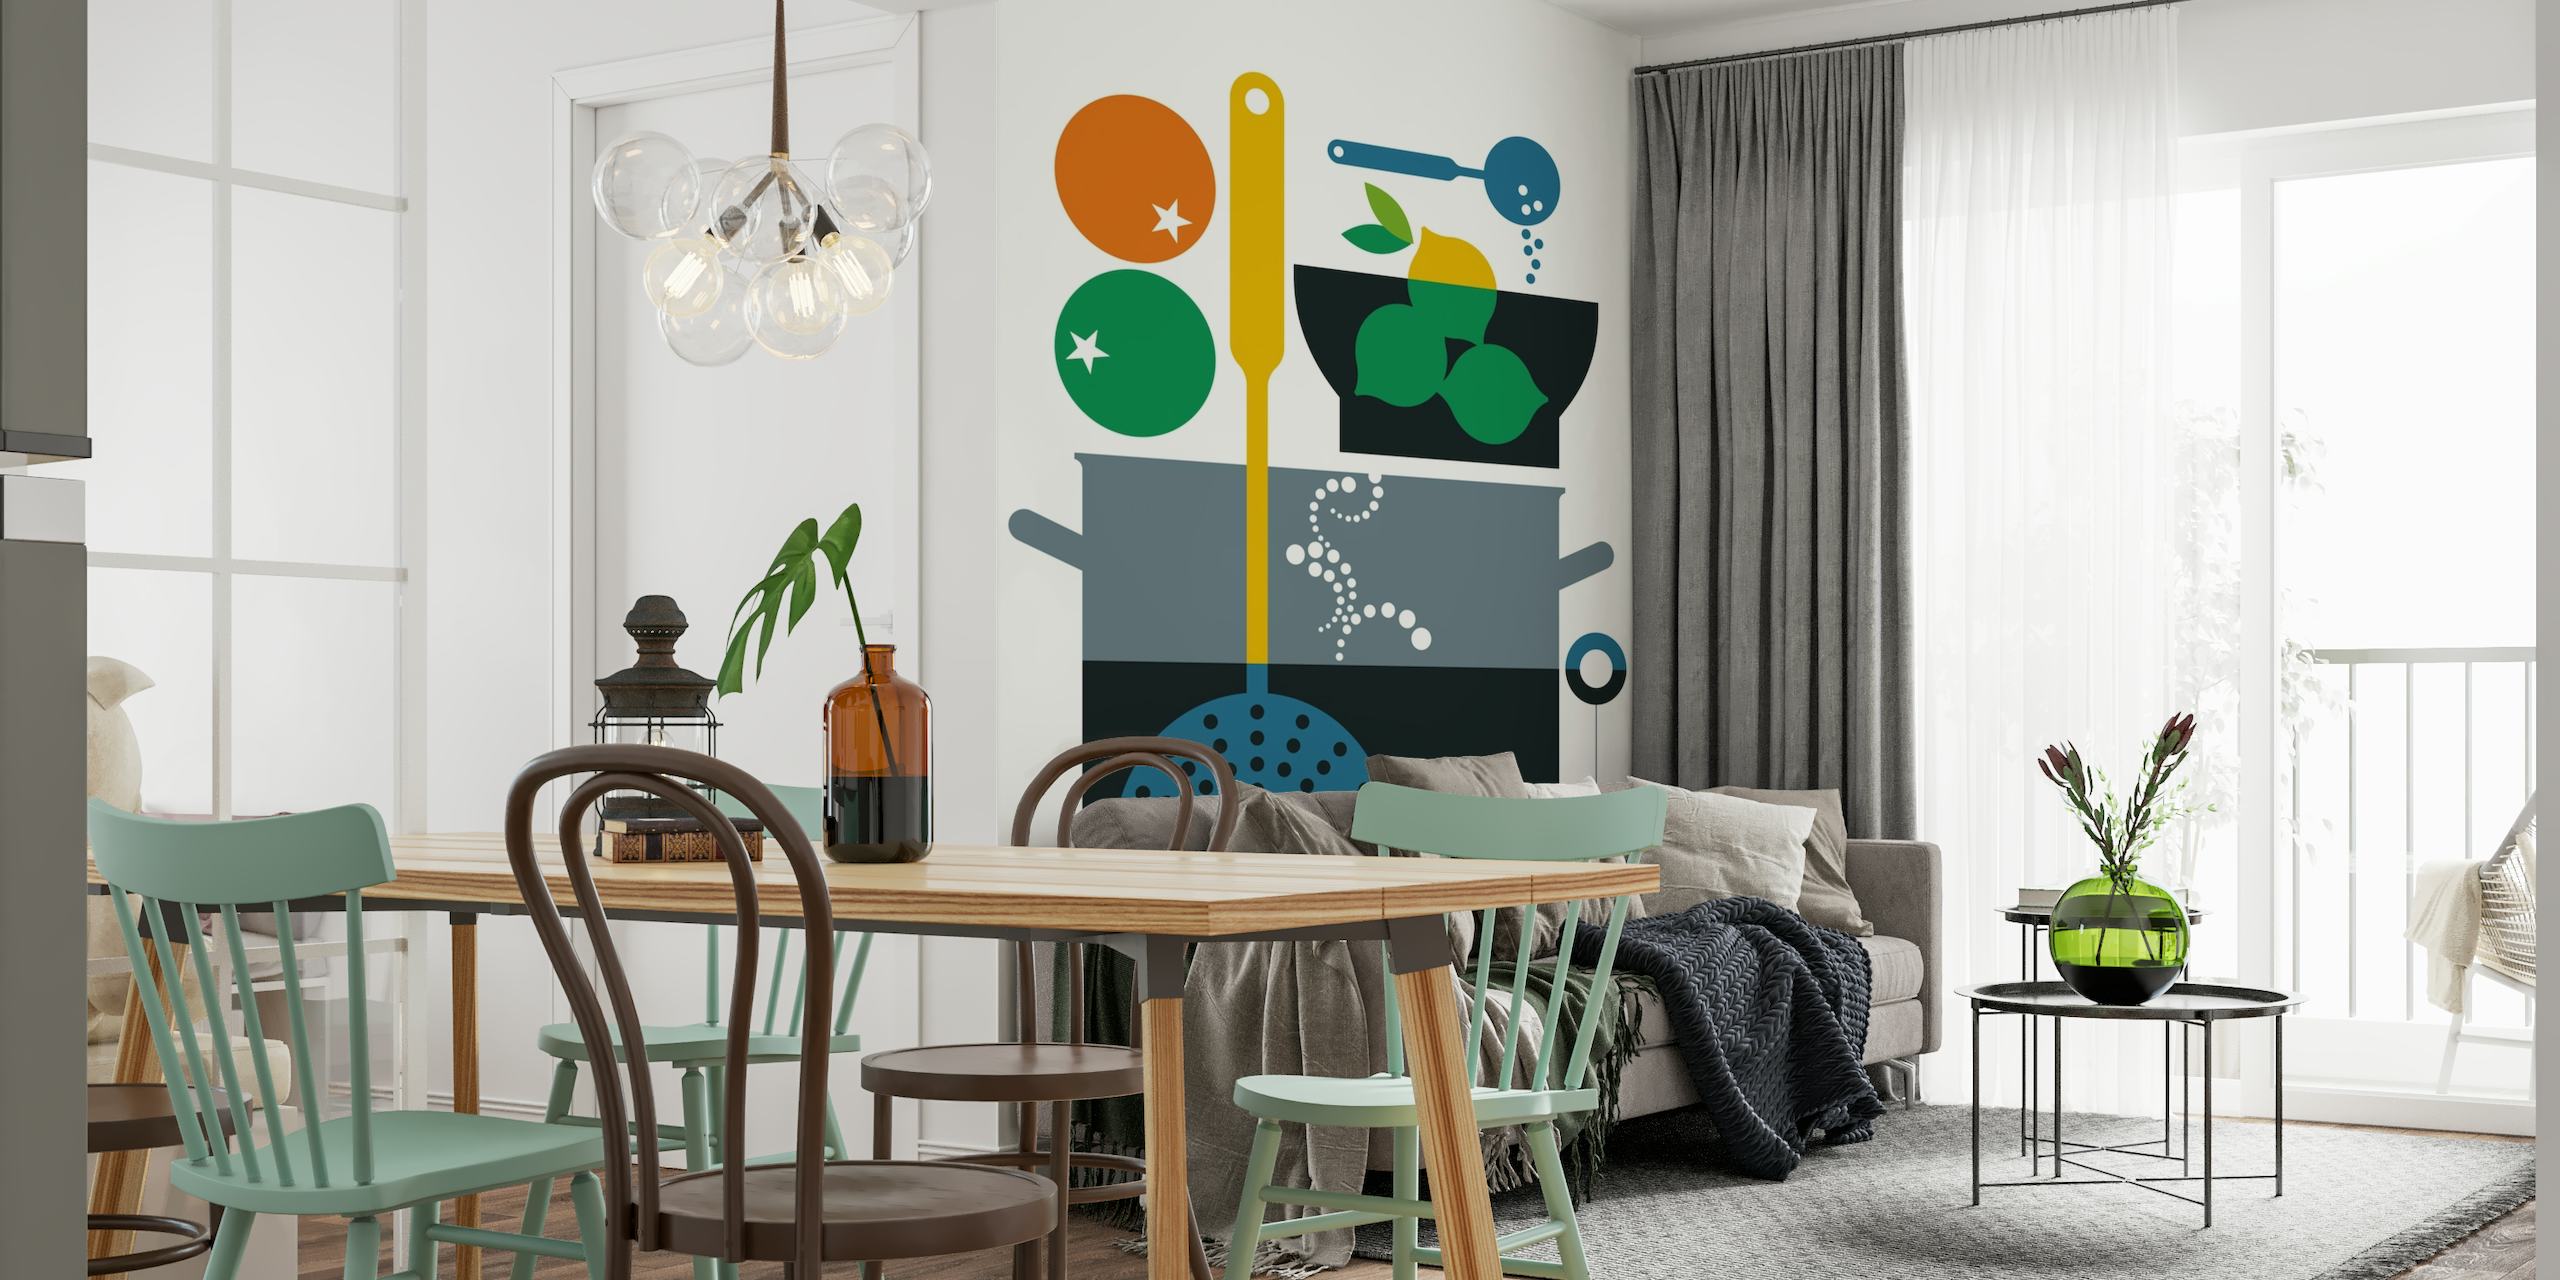 Graphic kitchen utensils and fresh produce wall mural for a modern home